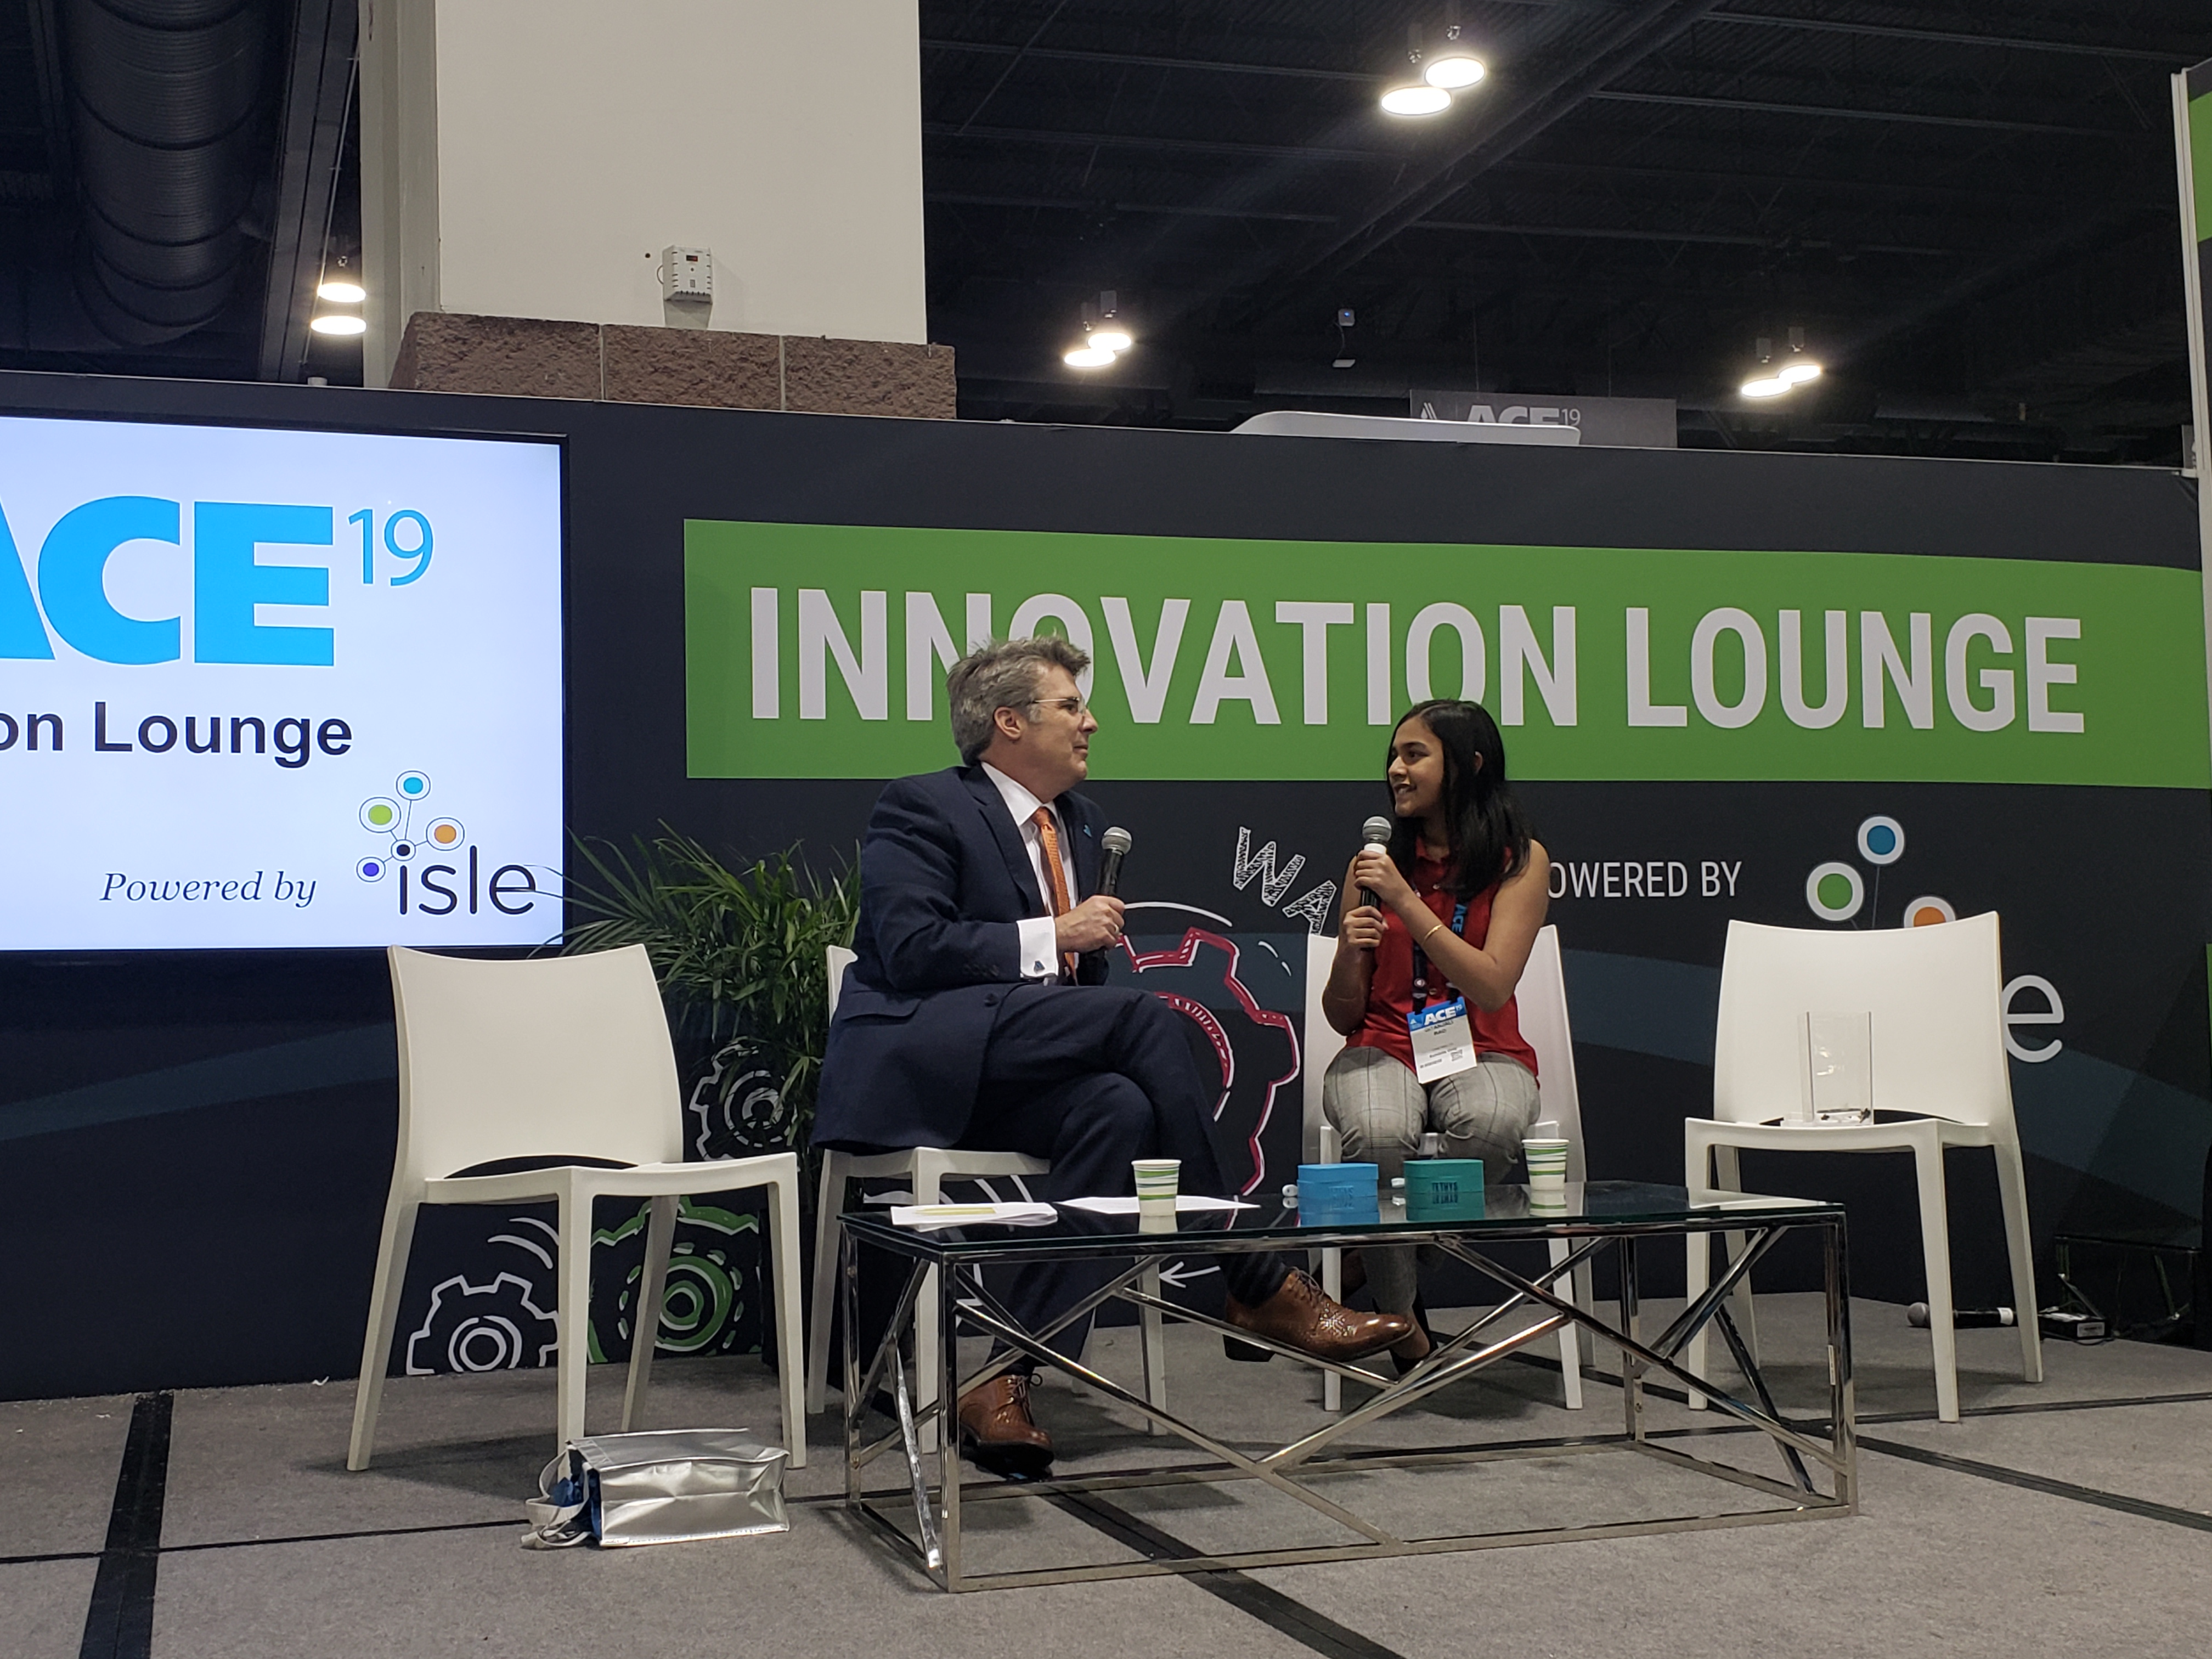 A man and a young woman sit on a stage, with the sign "Innovation Lounge" behind them.